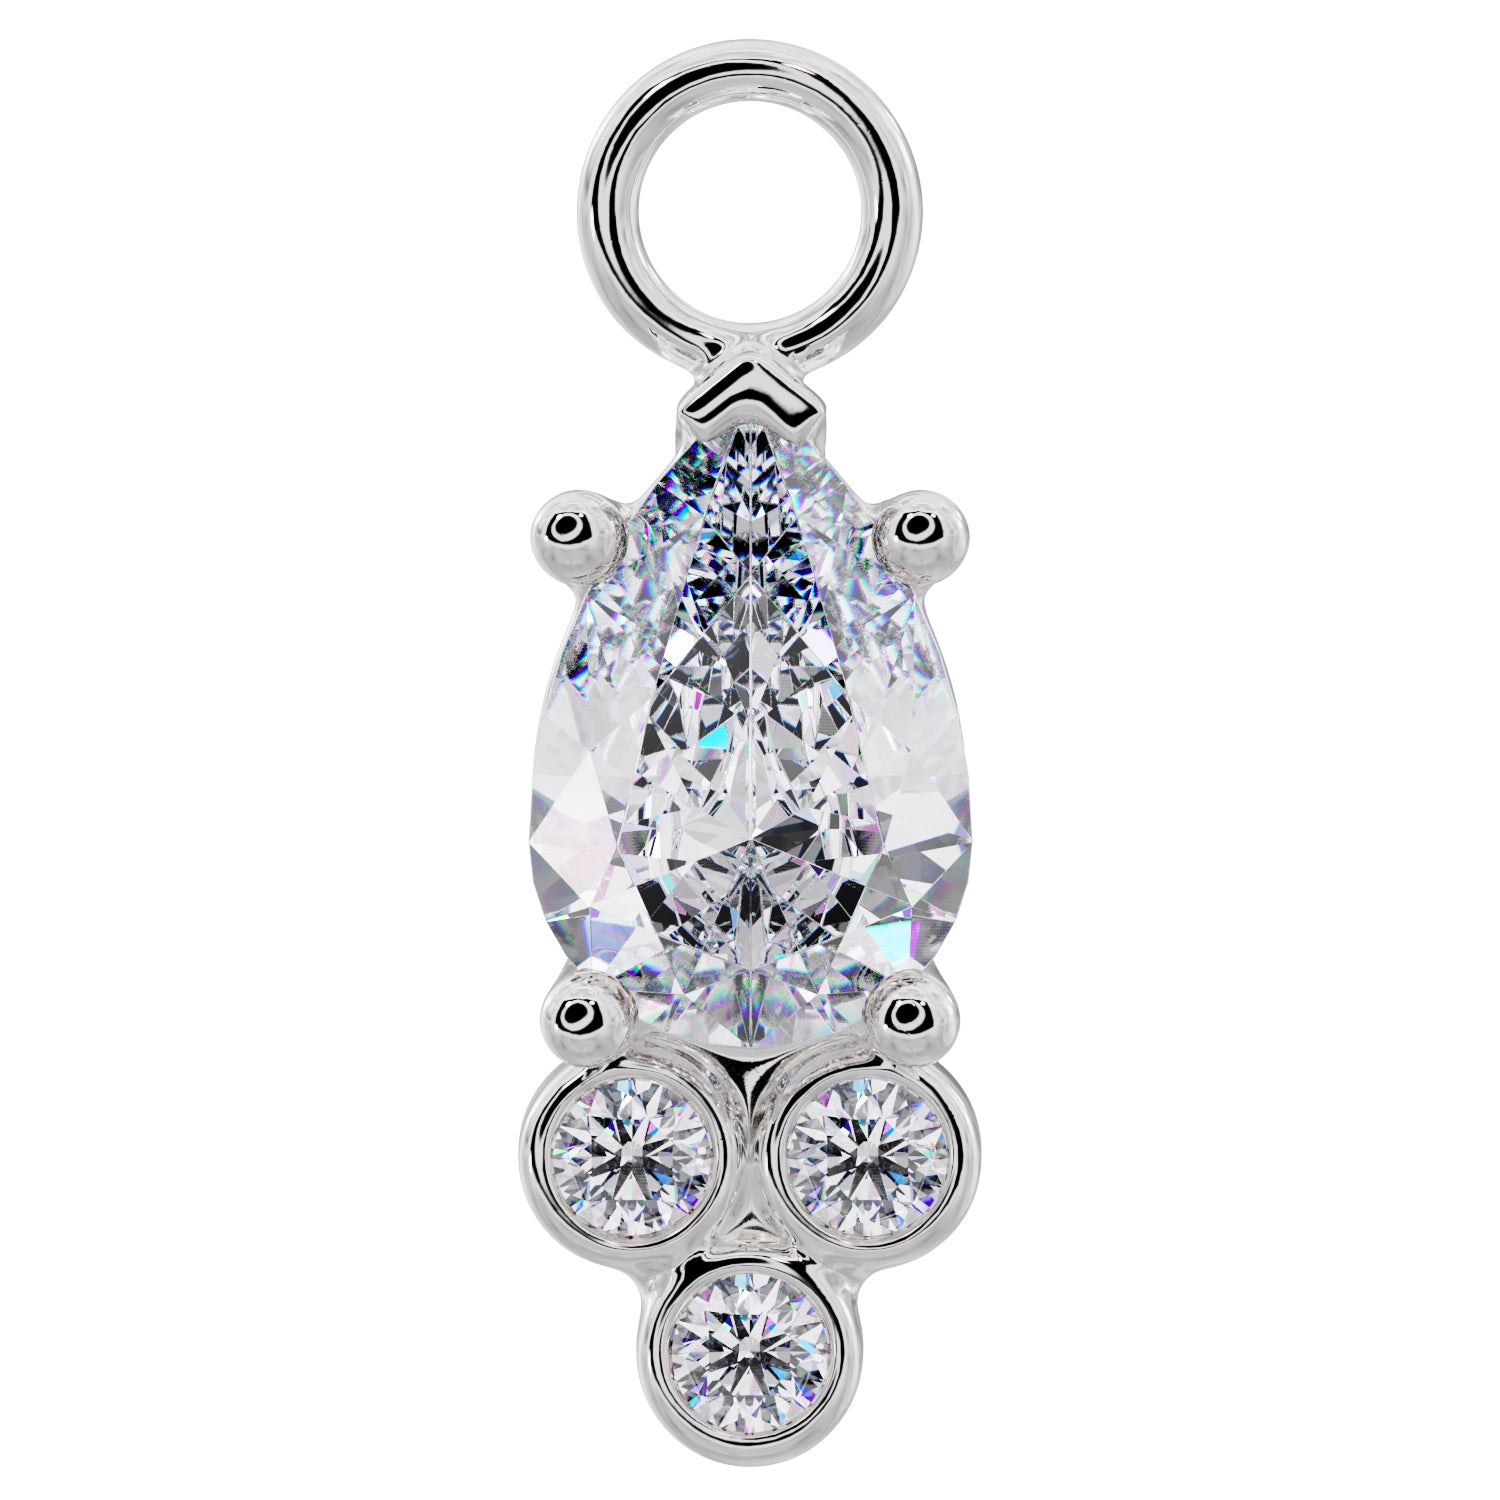 Pear with Tiny Diamonds Charm Accessory for Piercing Jewelry-Cubic Zirconia   950 Platinum